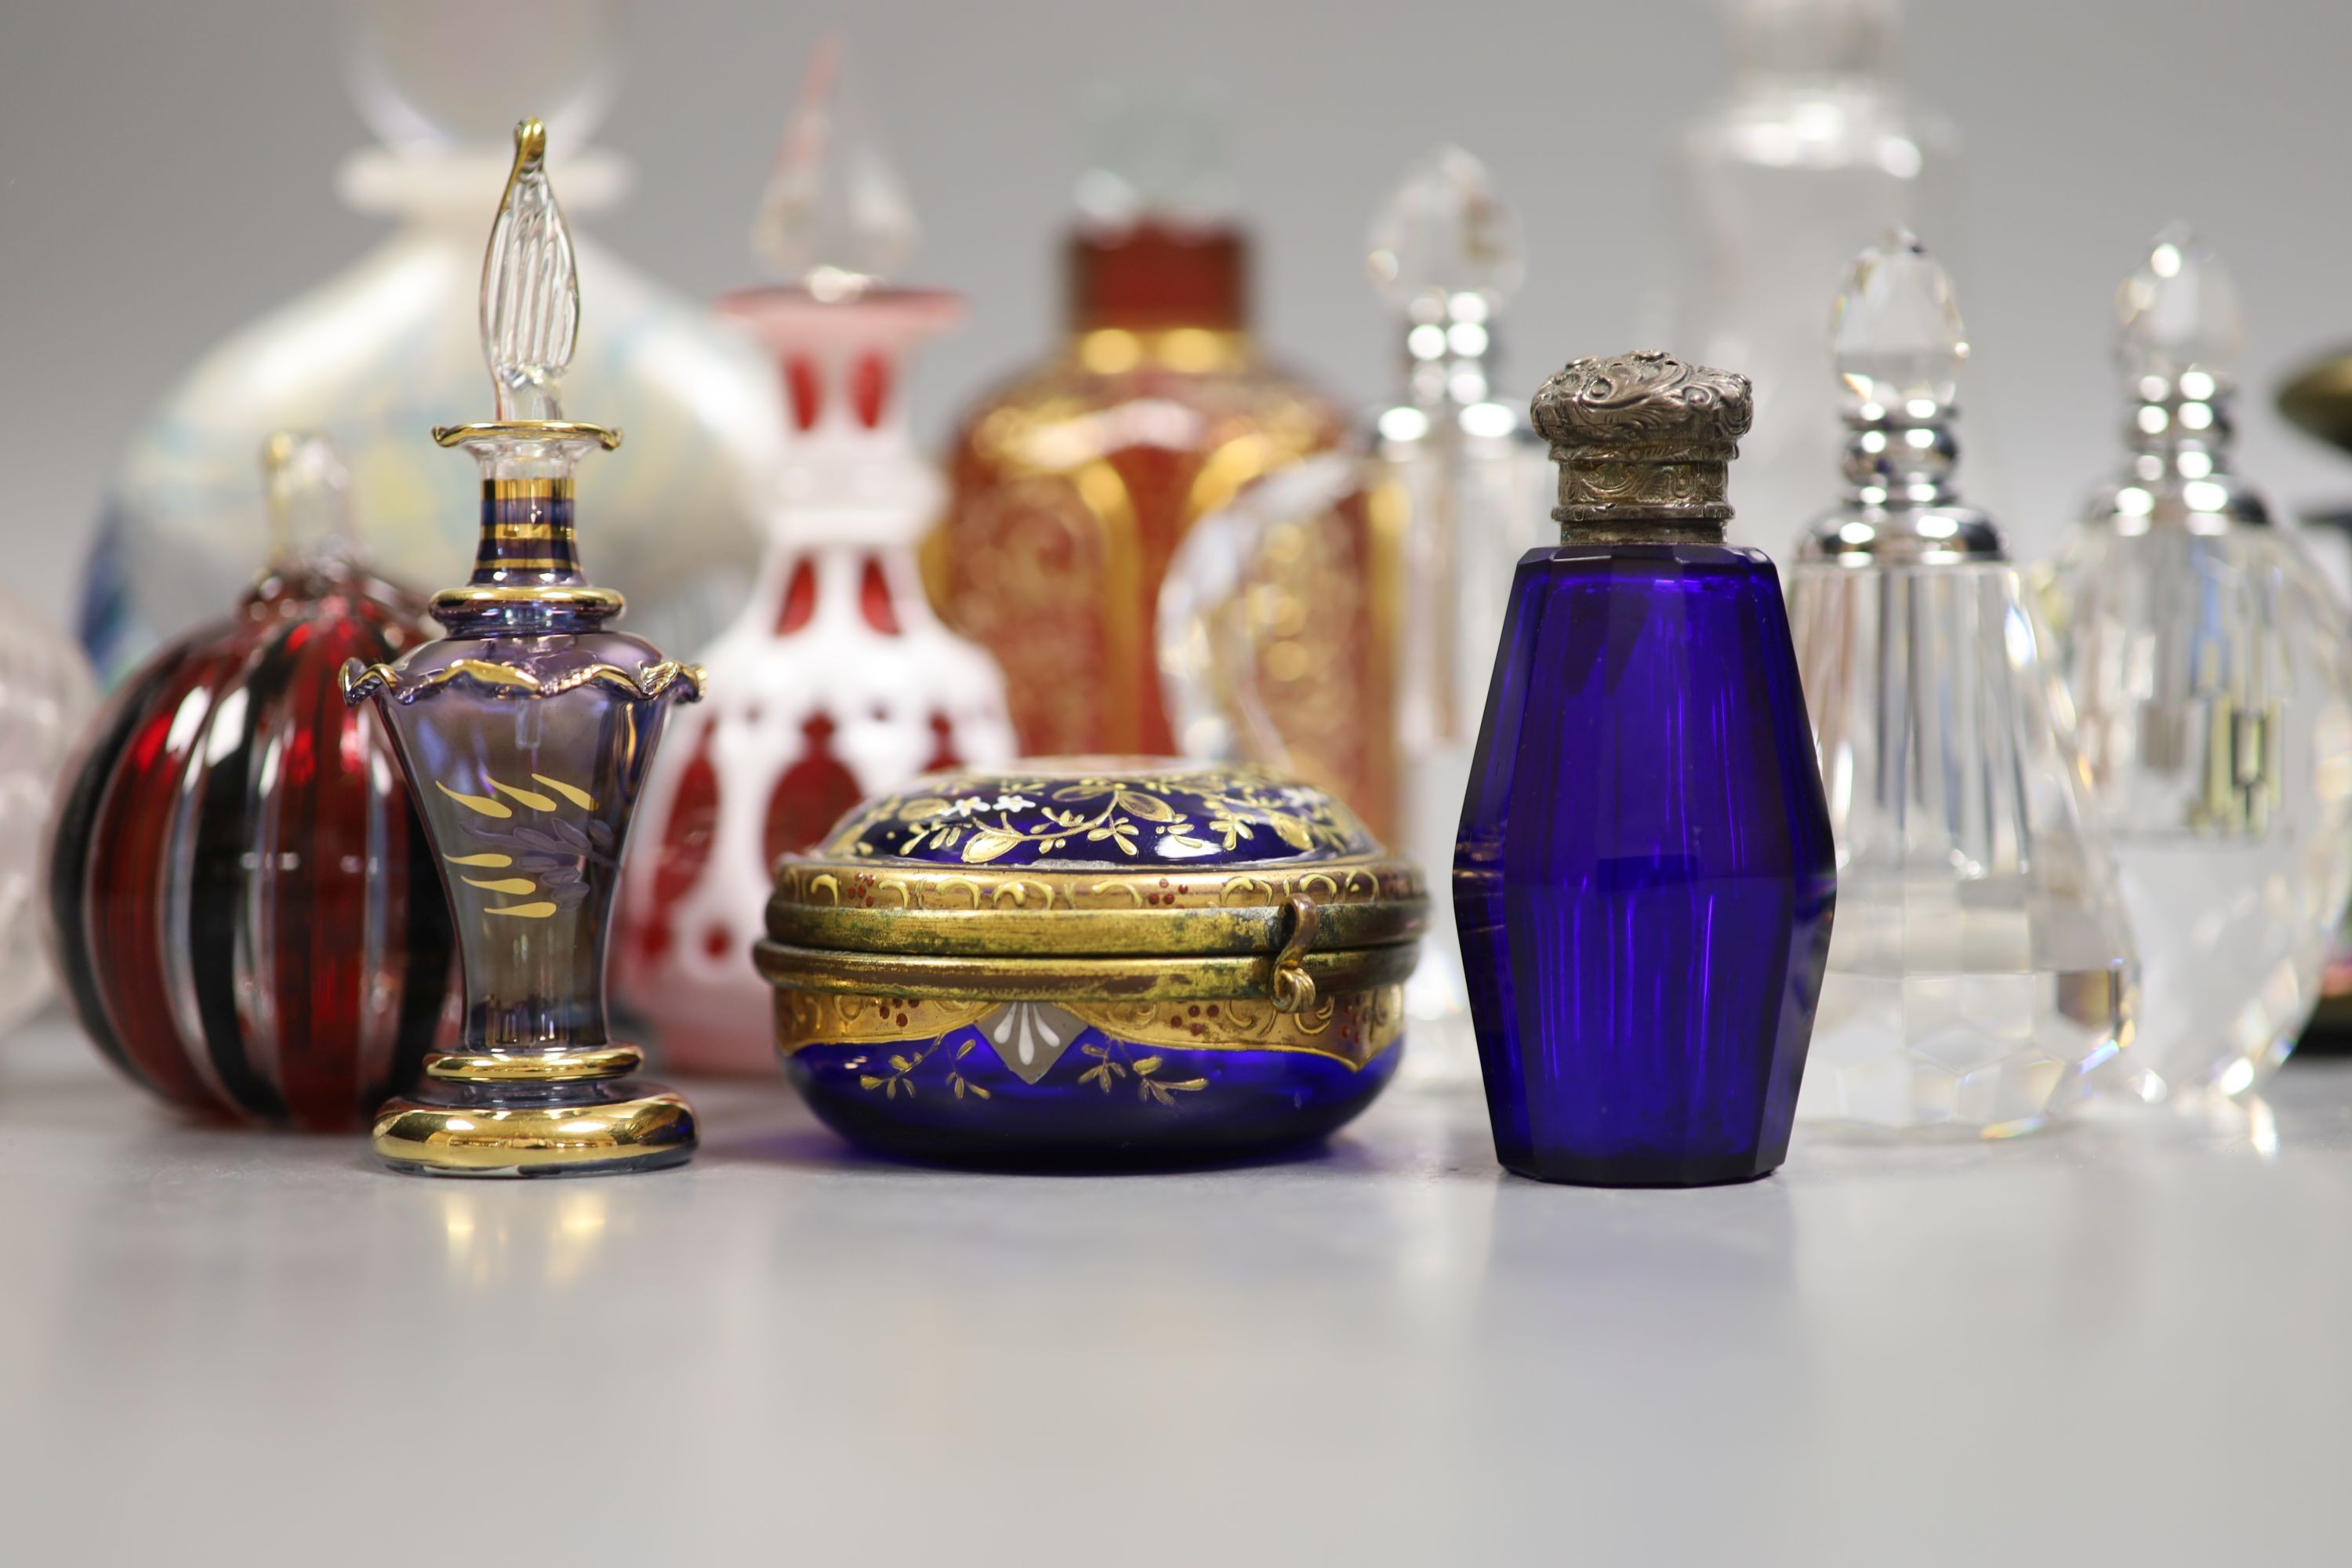 A collection of various glass scent bottles including a Lalique flower scent bottle and Bohemian examples, tallest 20.5cm